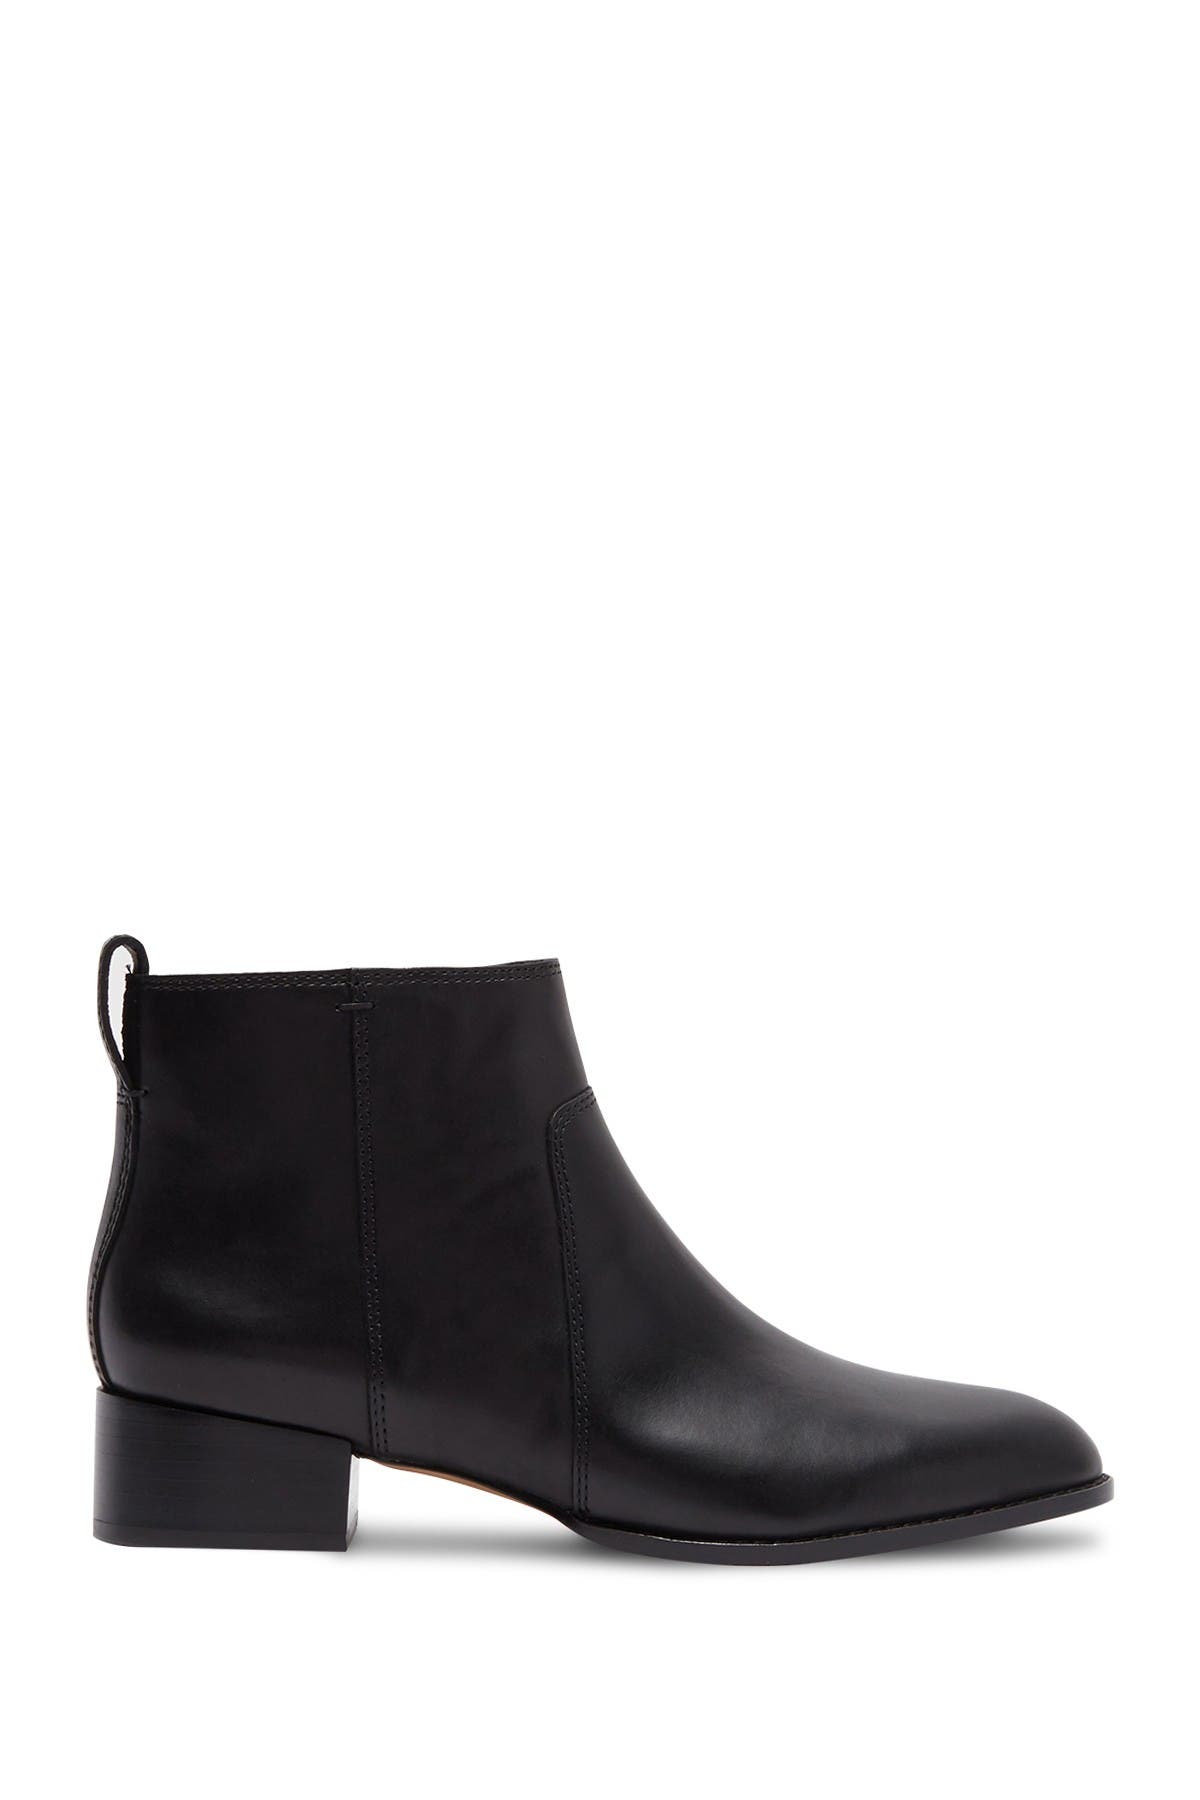 Madewell Camden Leather Ankle Bootie In Black